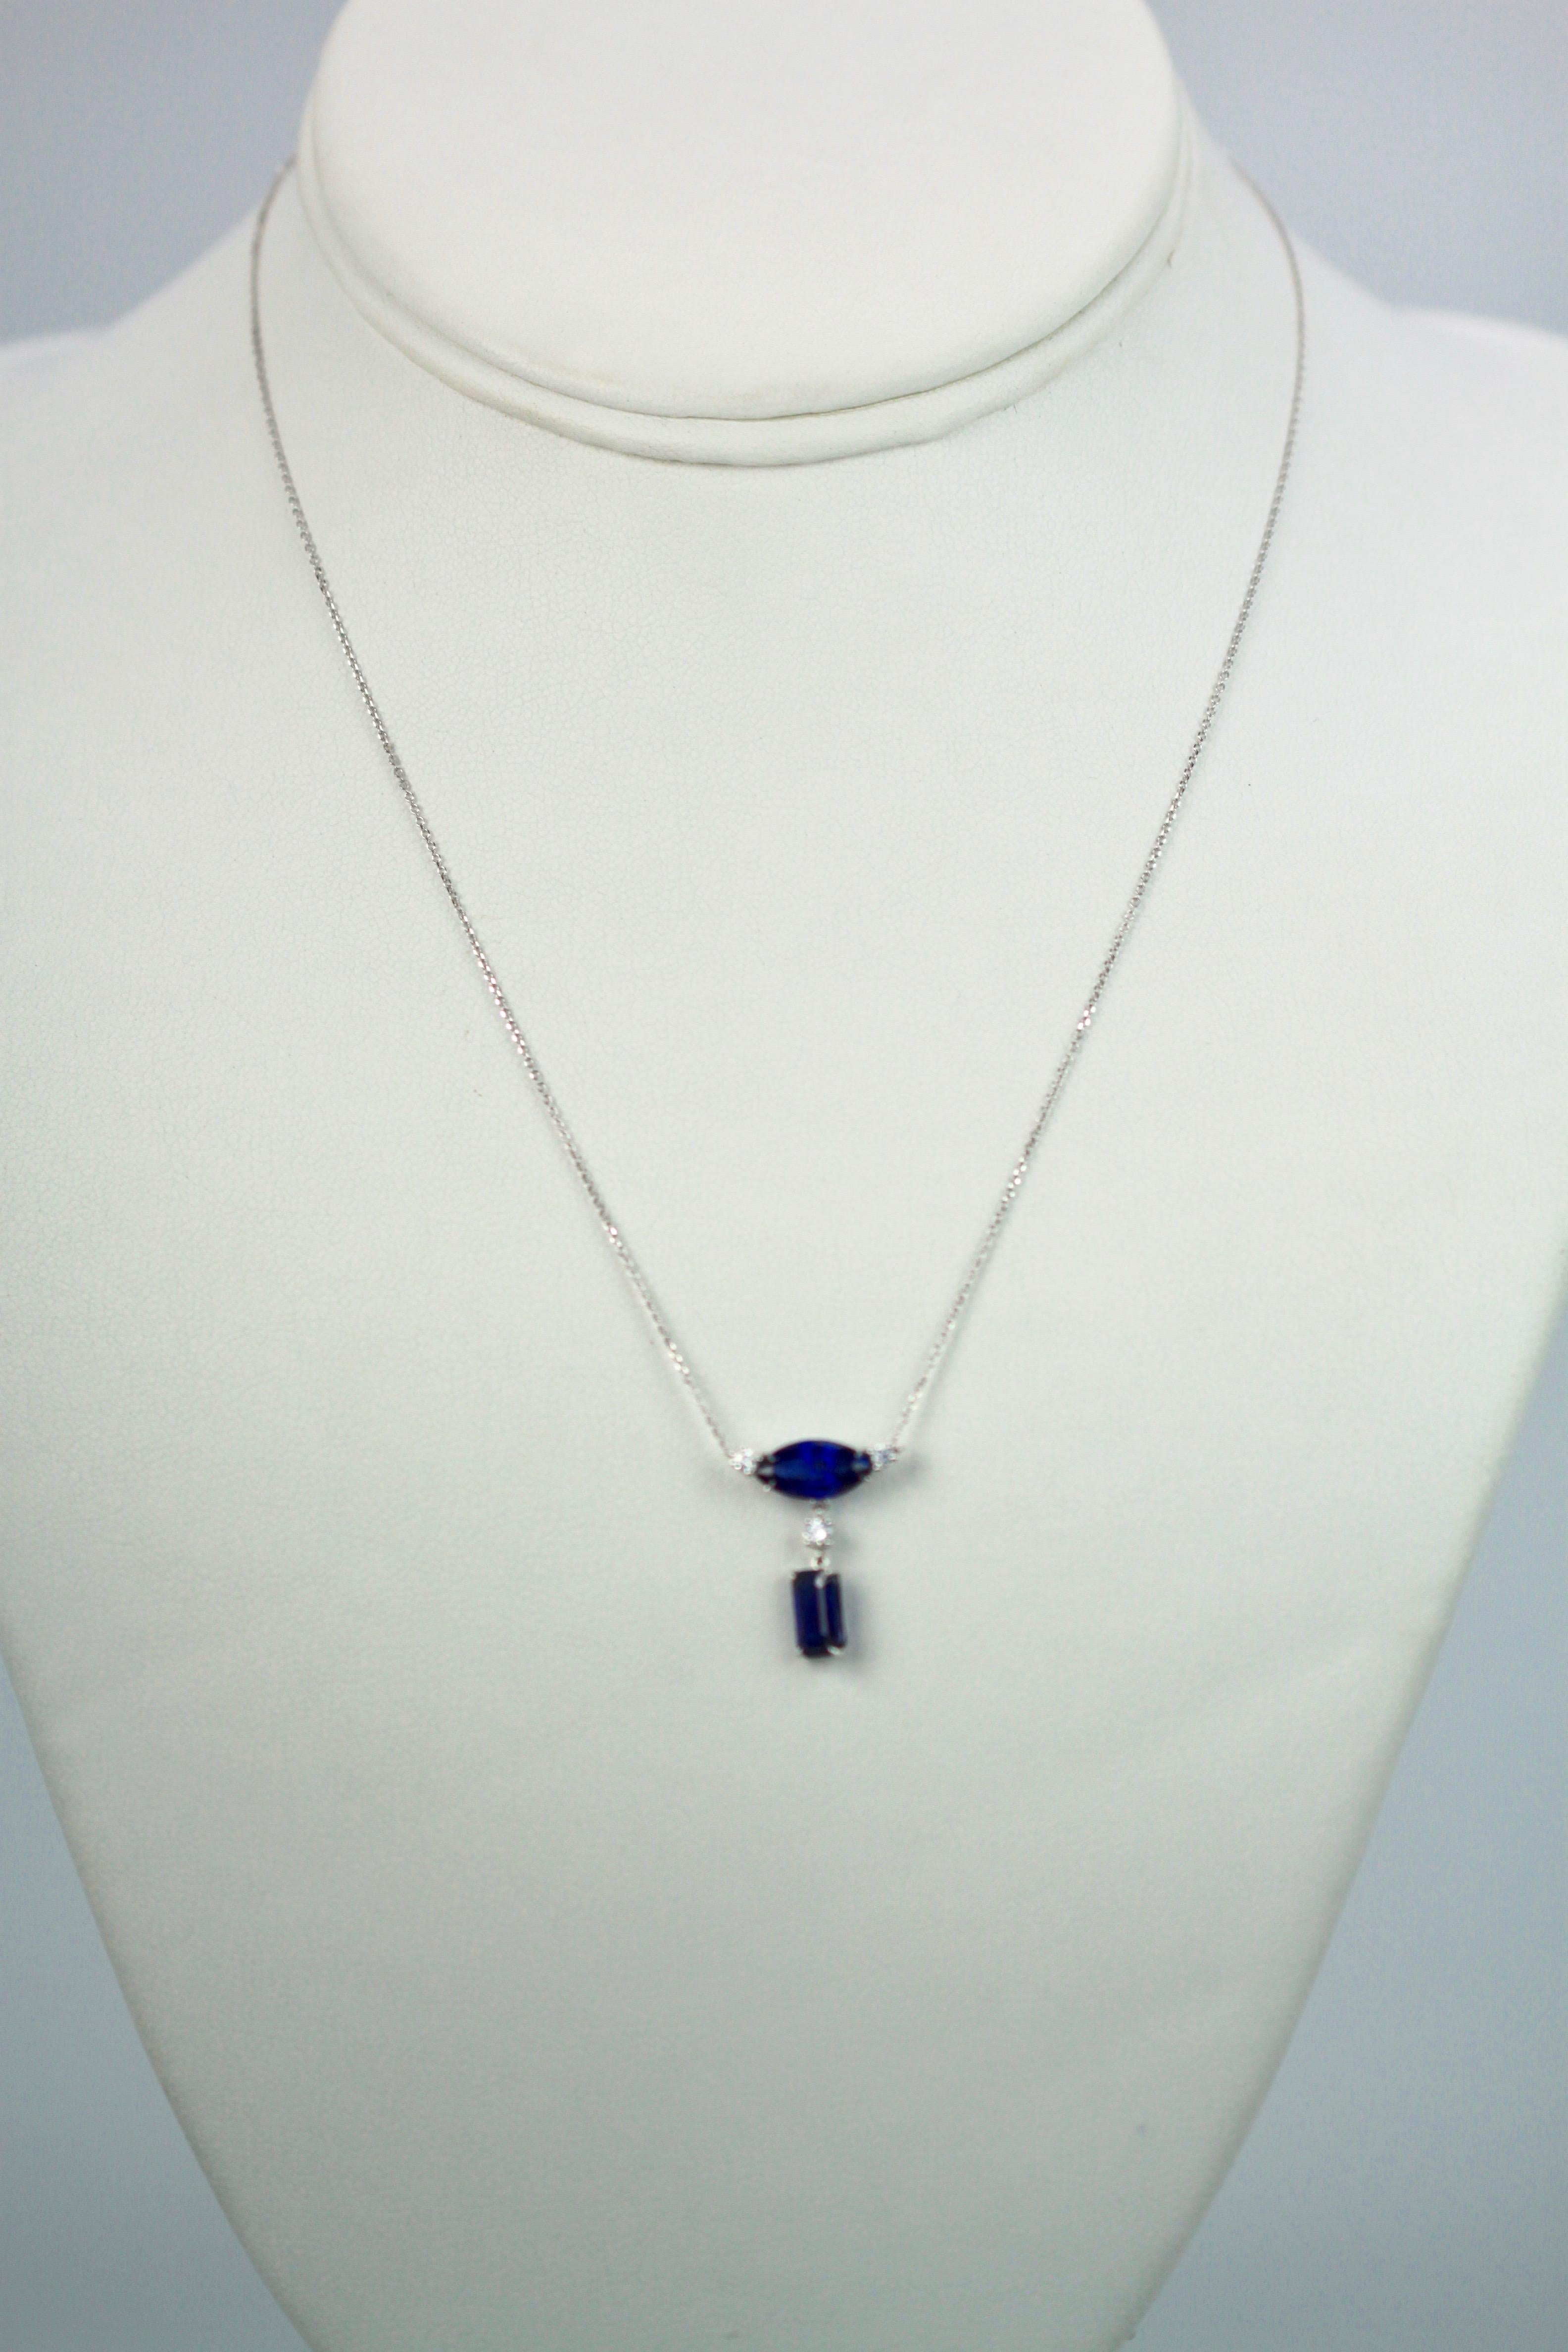 This Double Sapphire Diamond Necklace is small but packs a punch.  The Sapphires are gorgeous shade of deep blue on a white Gold Necklace marked 750.  One Sapphire is 1.00 Carat and the other is .80 points with 3 Diamonds, (2) at 0.05 carats and (1)